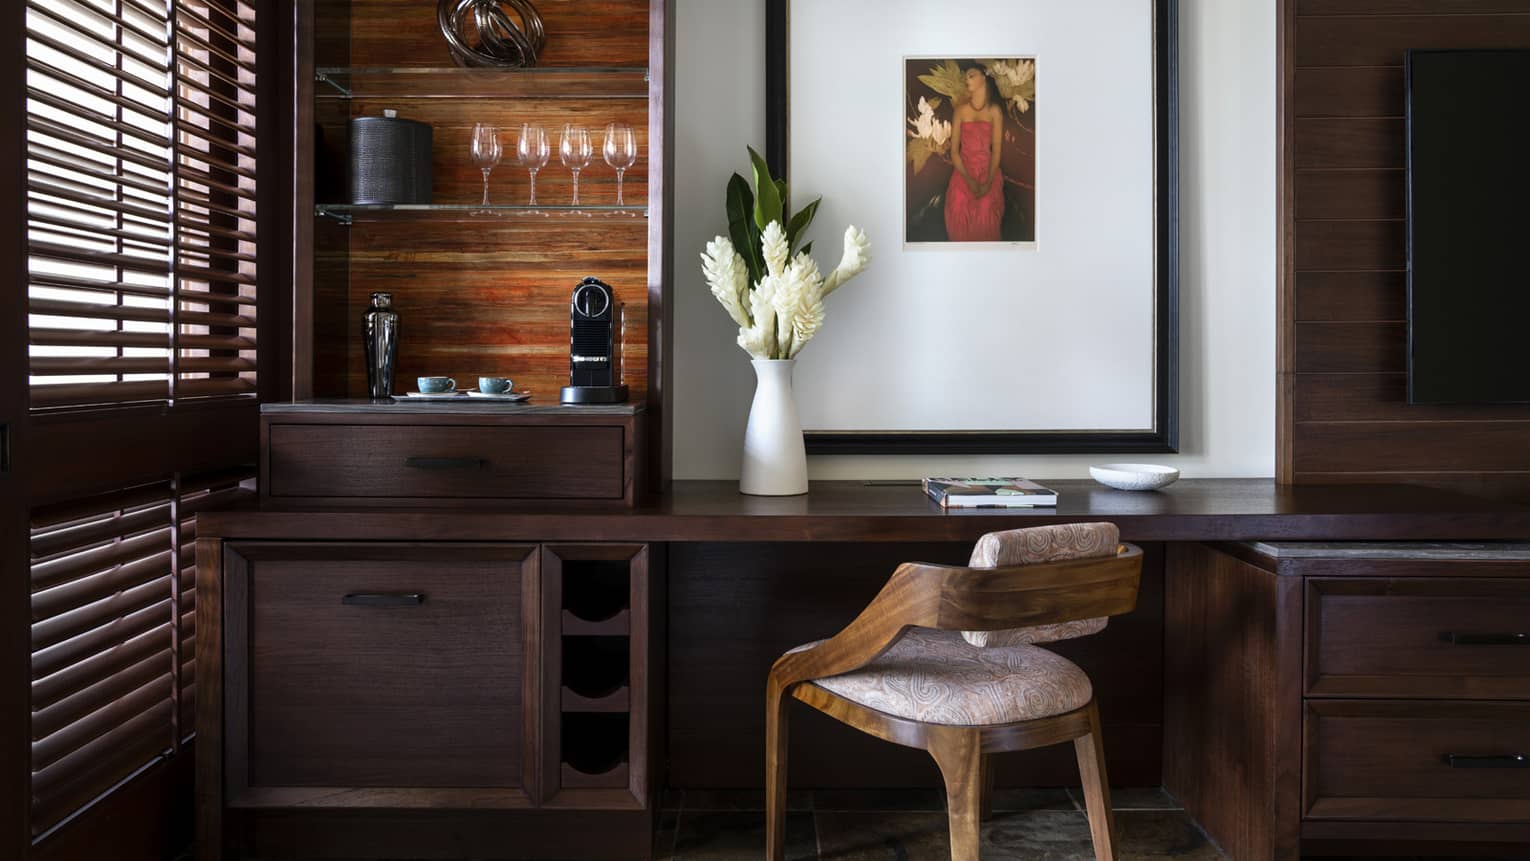 Built-in dark wood desk with wooden chair, vase of flowers, and glass shelves holding wine glasses